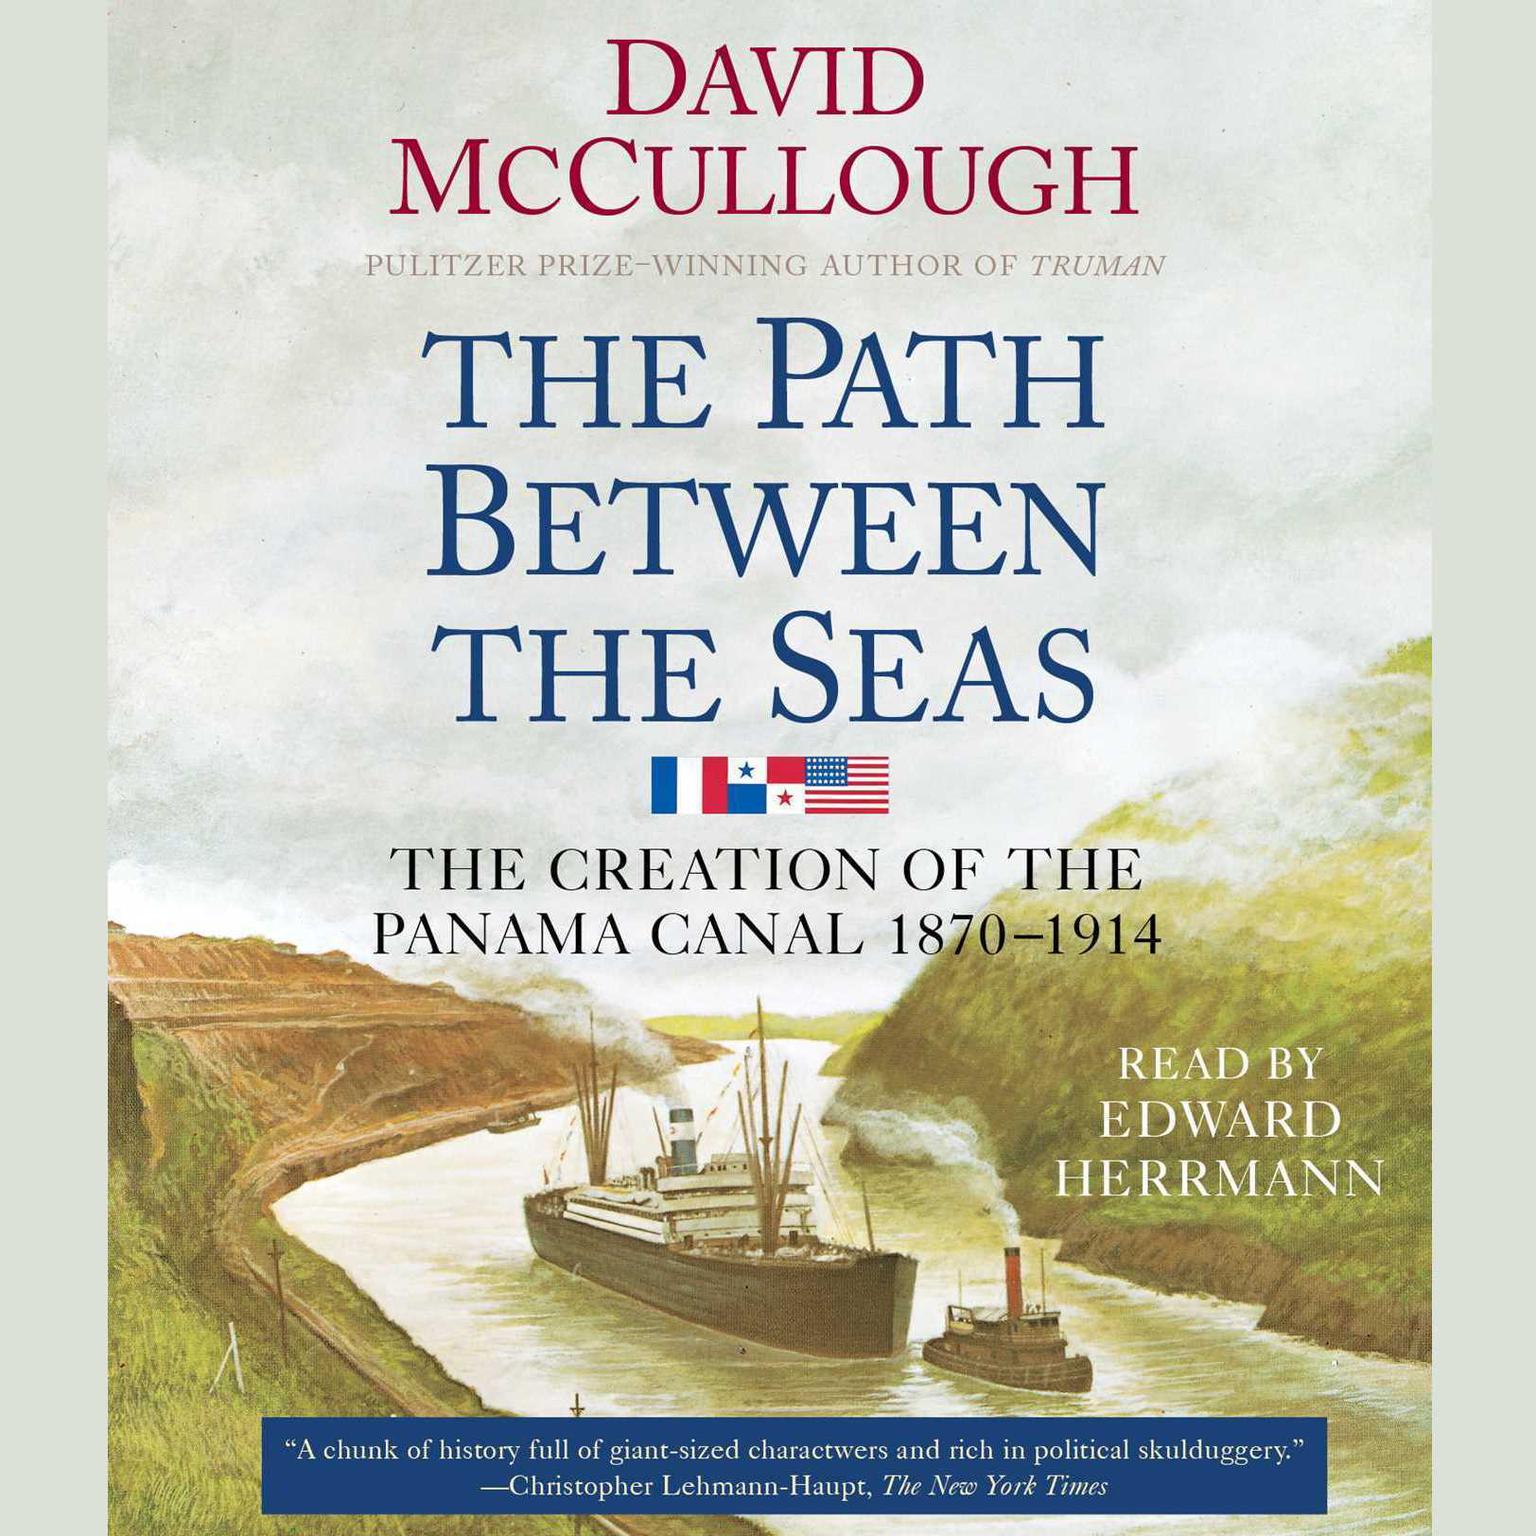 The Path Between the Seas (Abridged): The Creation of the Panama Canal, 1870-1914 Audiobook, by David McCullough